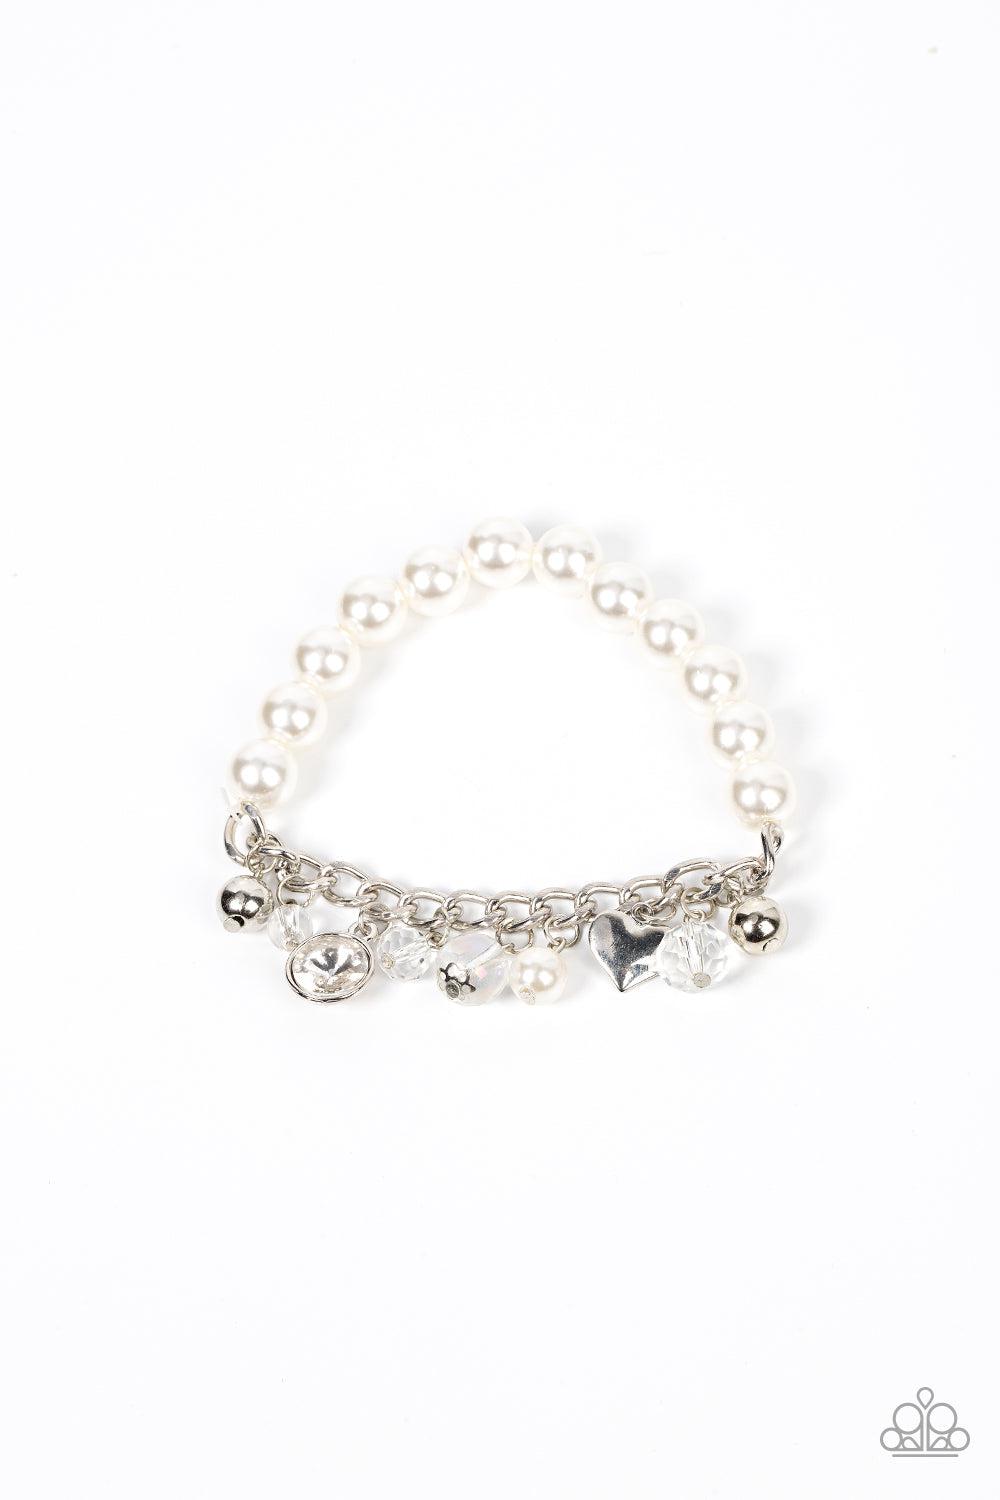 Adorningly Admirable White Pearl &amp; Charm Bracelet - Paparazzi Accessories- lightbox - CarasShop.com - $5 Jewelry by Cara Jewels